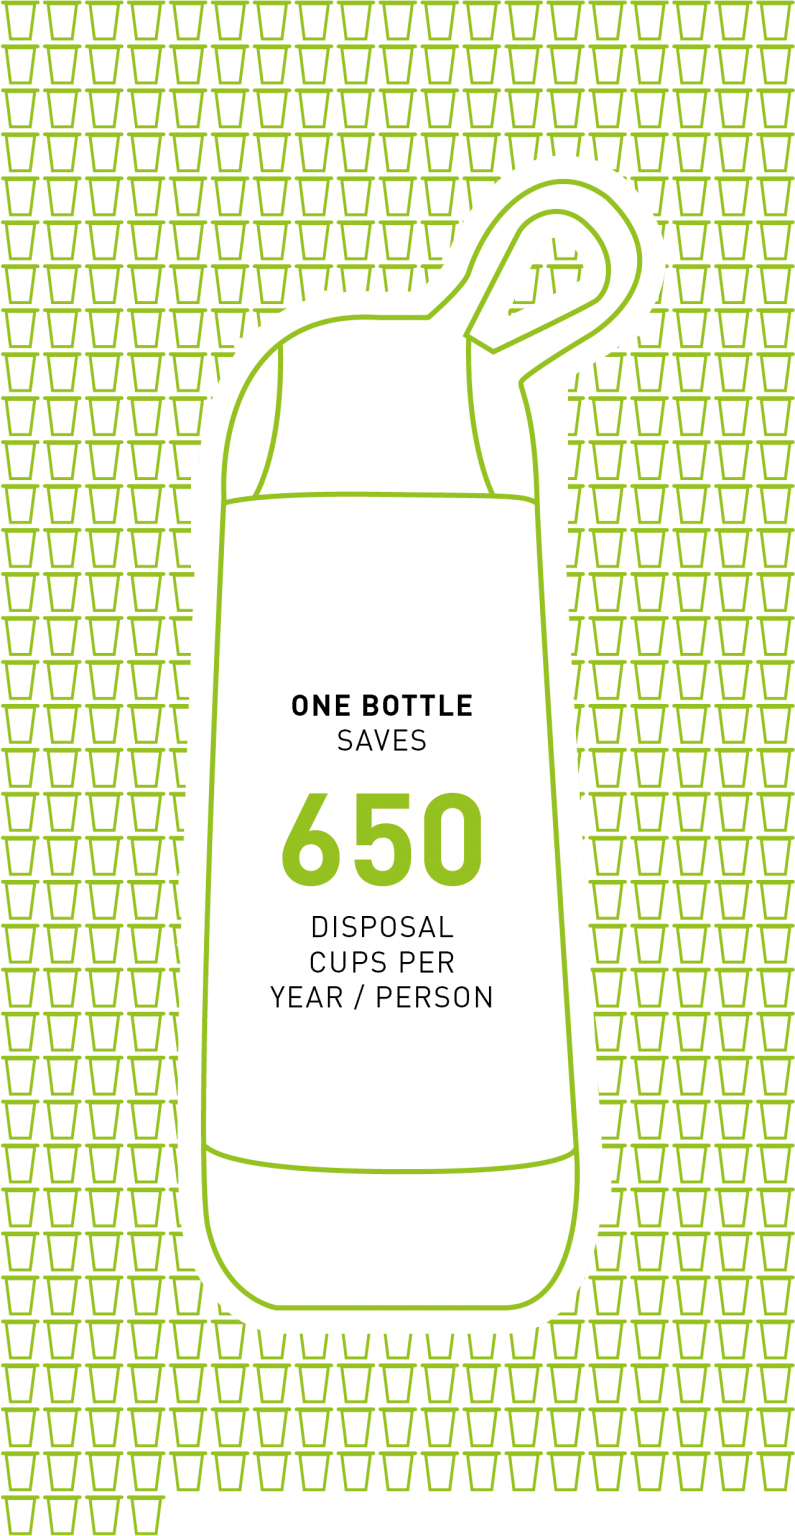 One Bottle Saves 650 Disposal Cups Per Year/Person